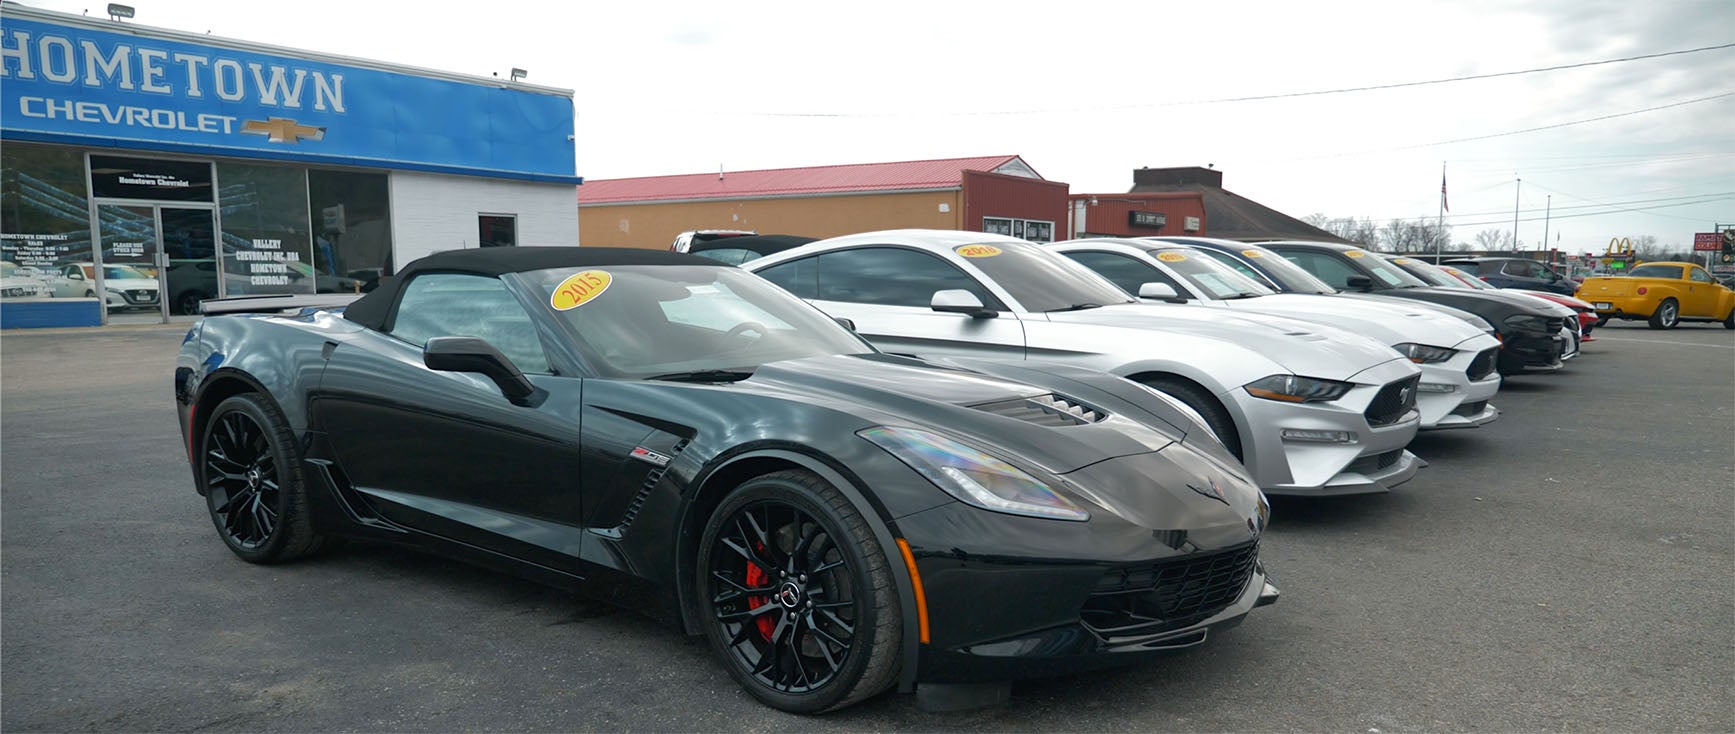 Sleek pre-owned coupes in the dealership lot in Waverly, OH